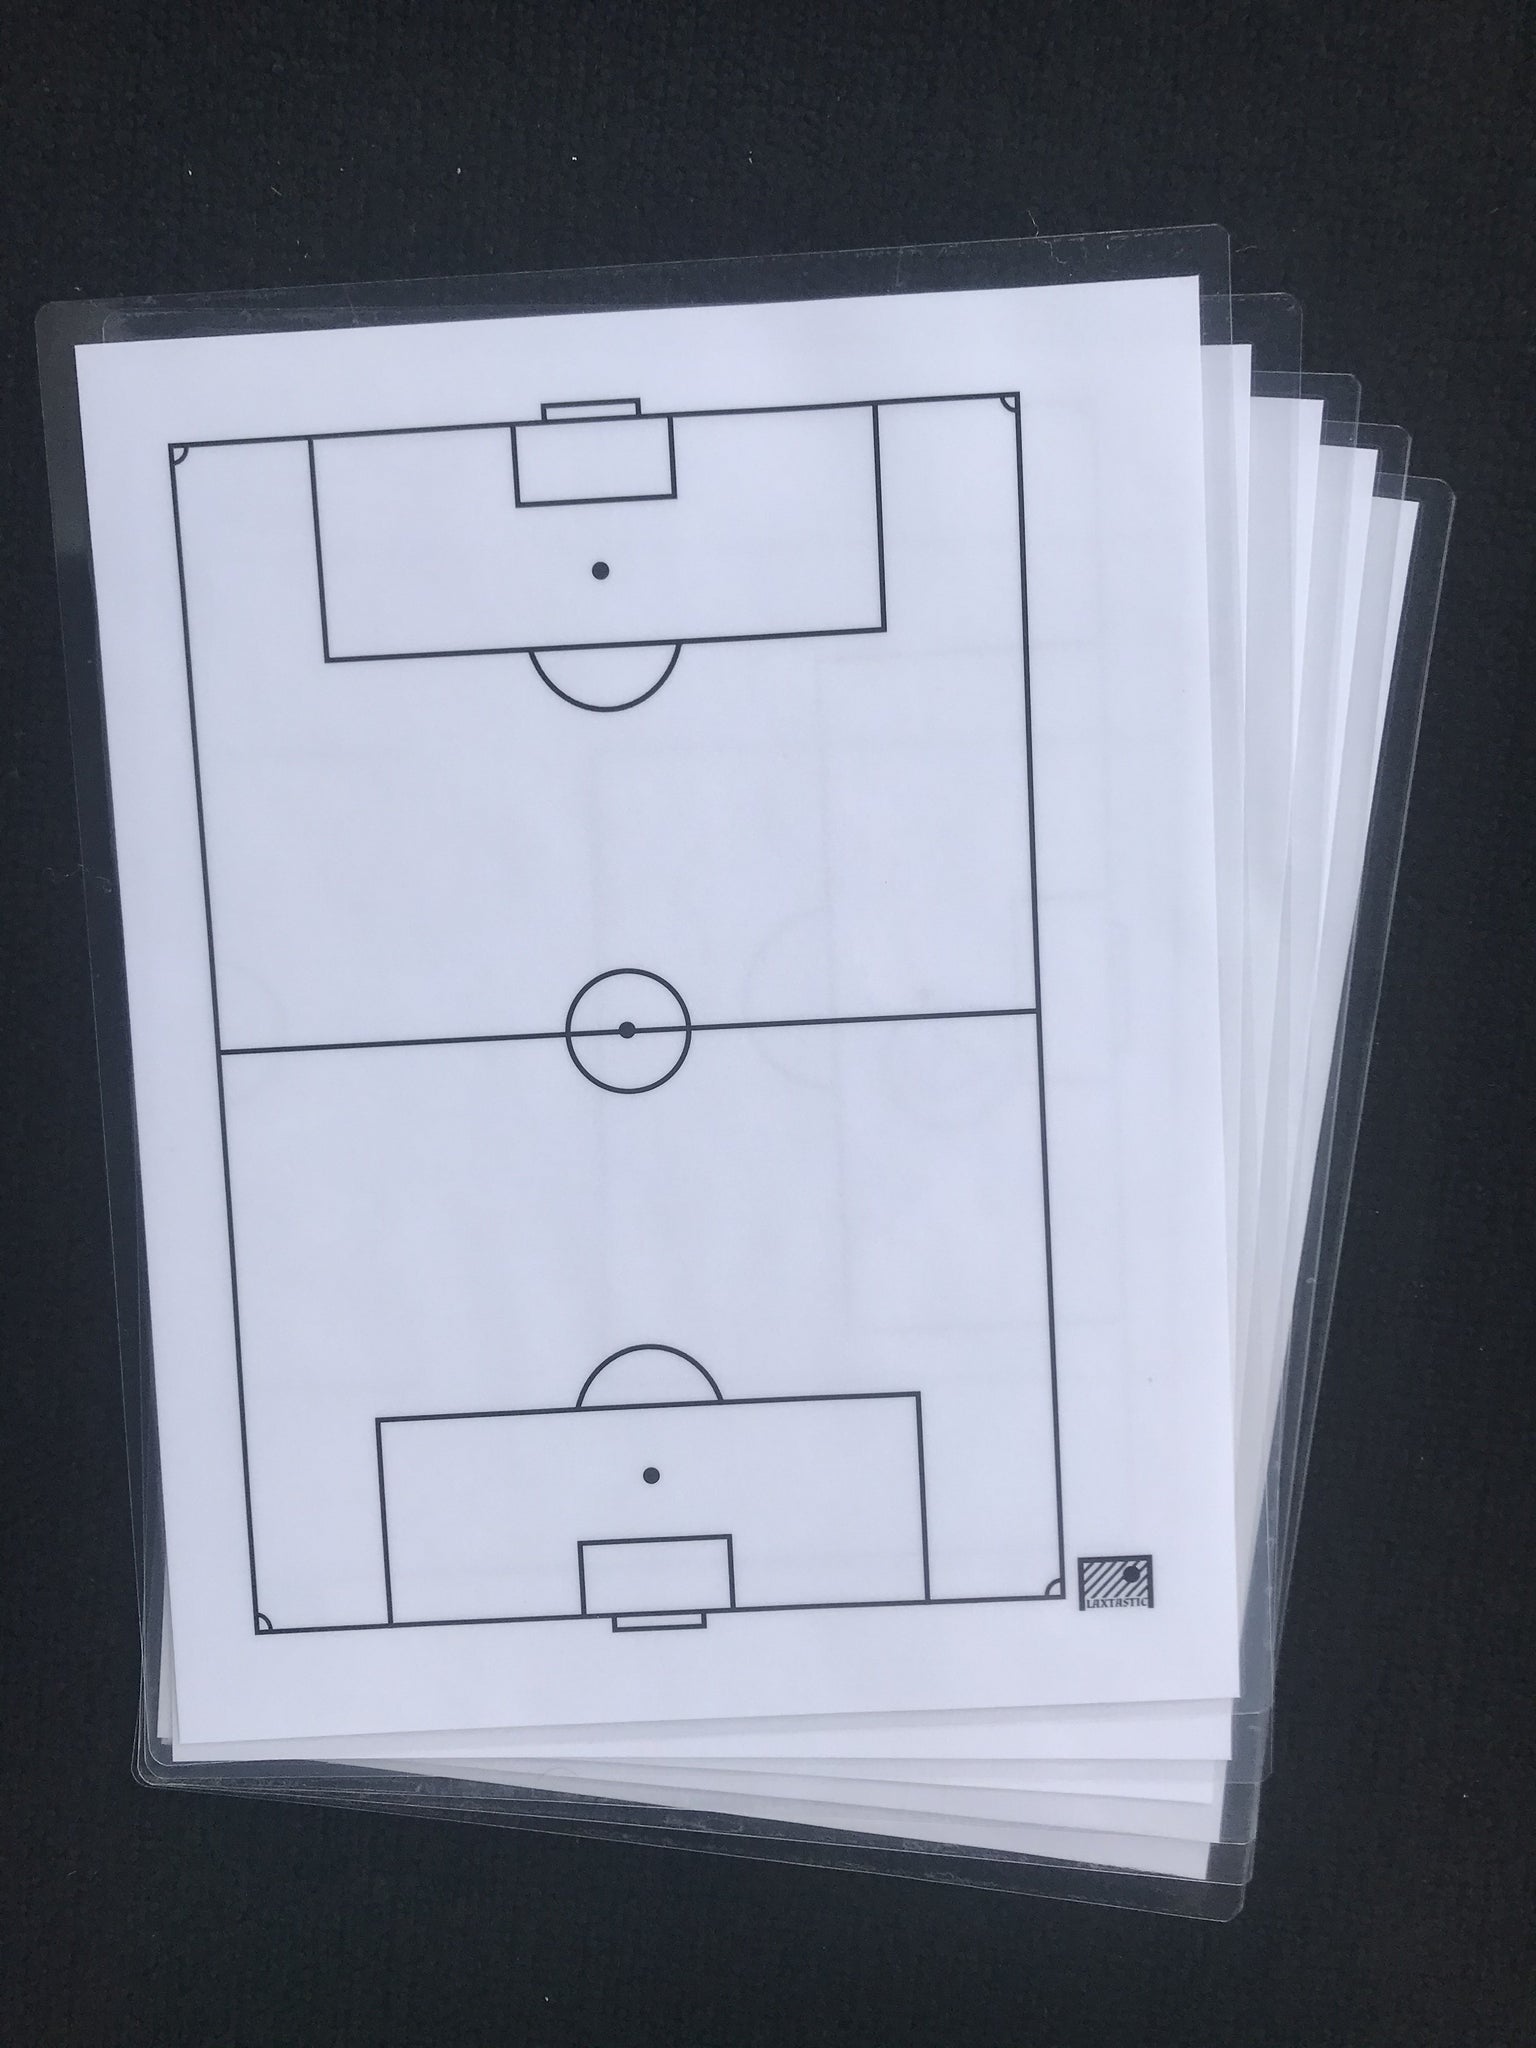 Soccer Dry Erase Sheets (Pack of 5) – Laxtastic LLC